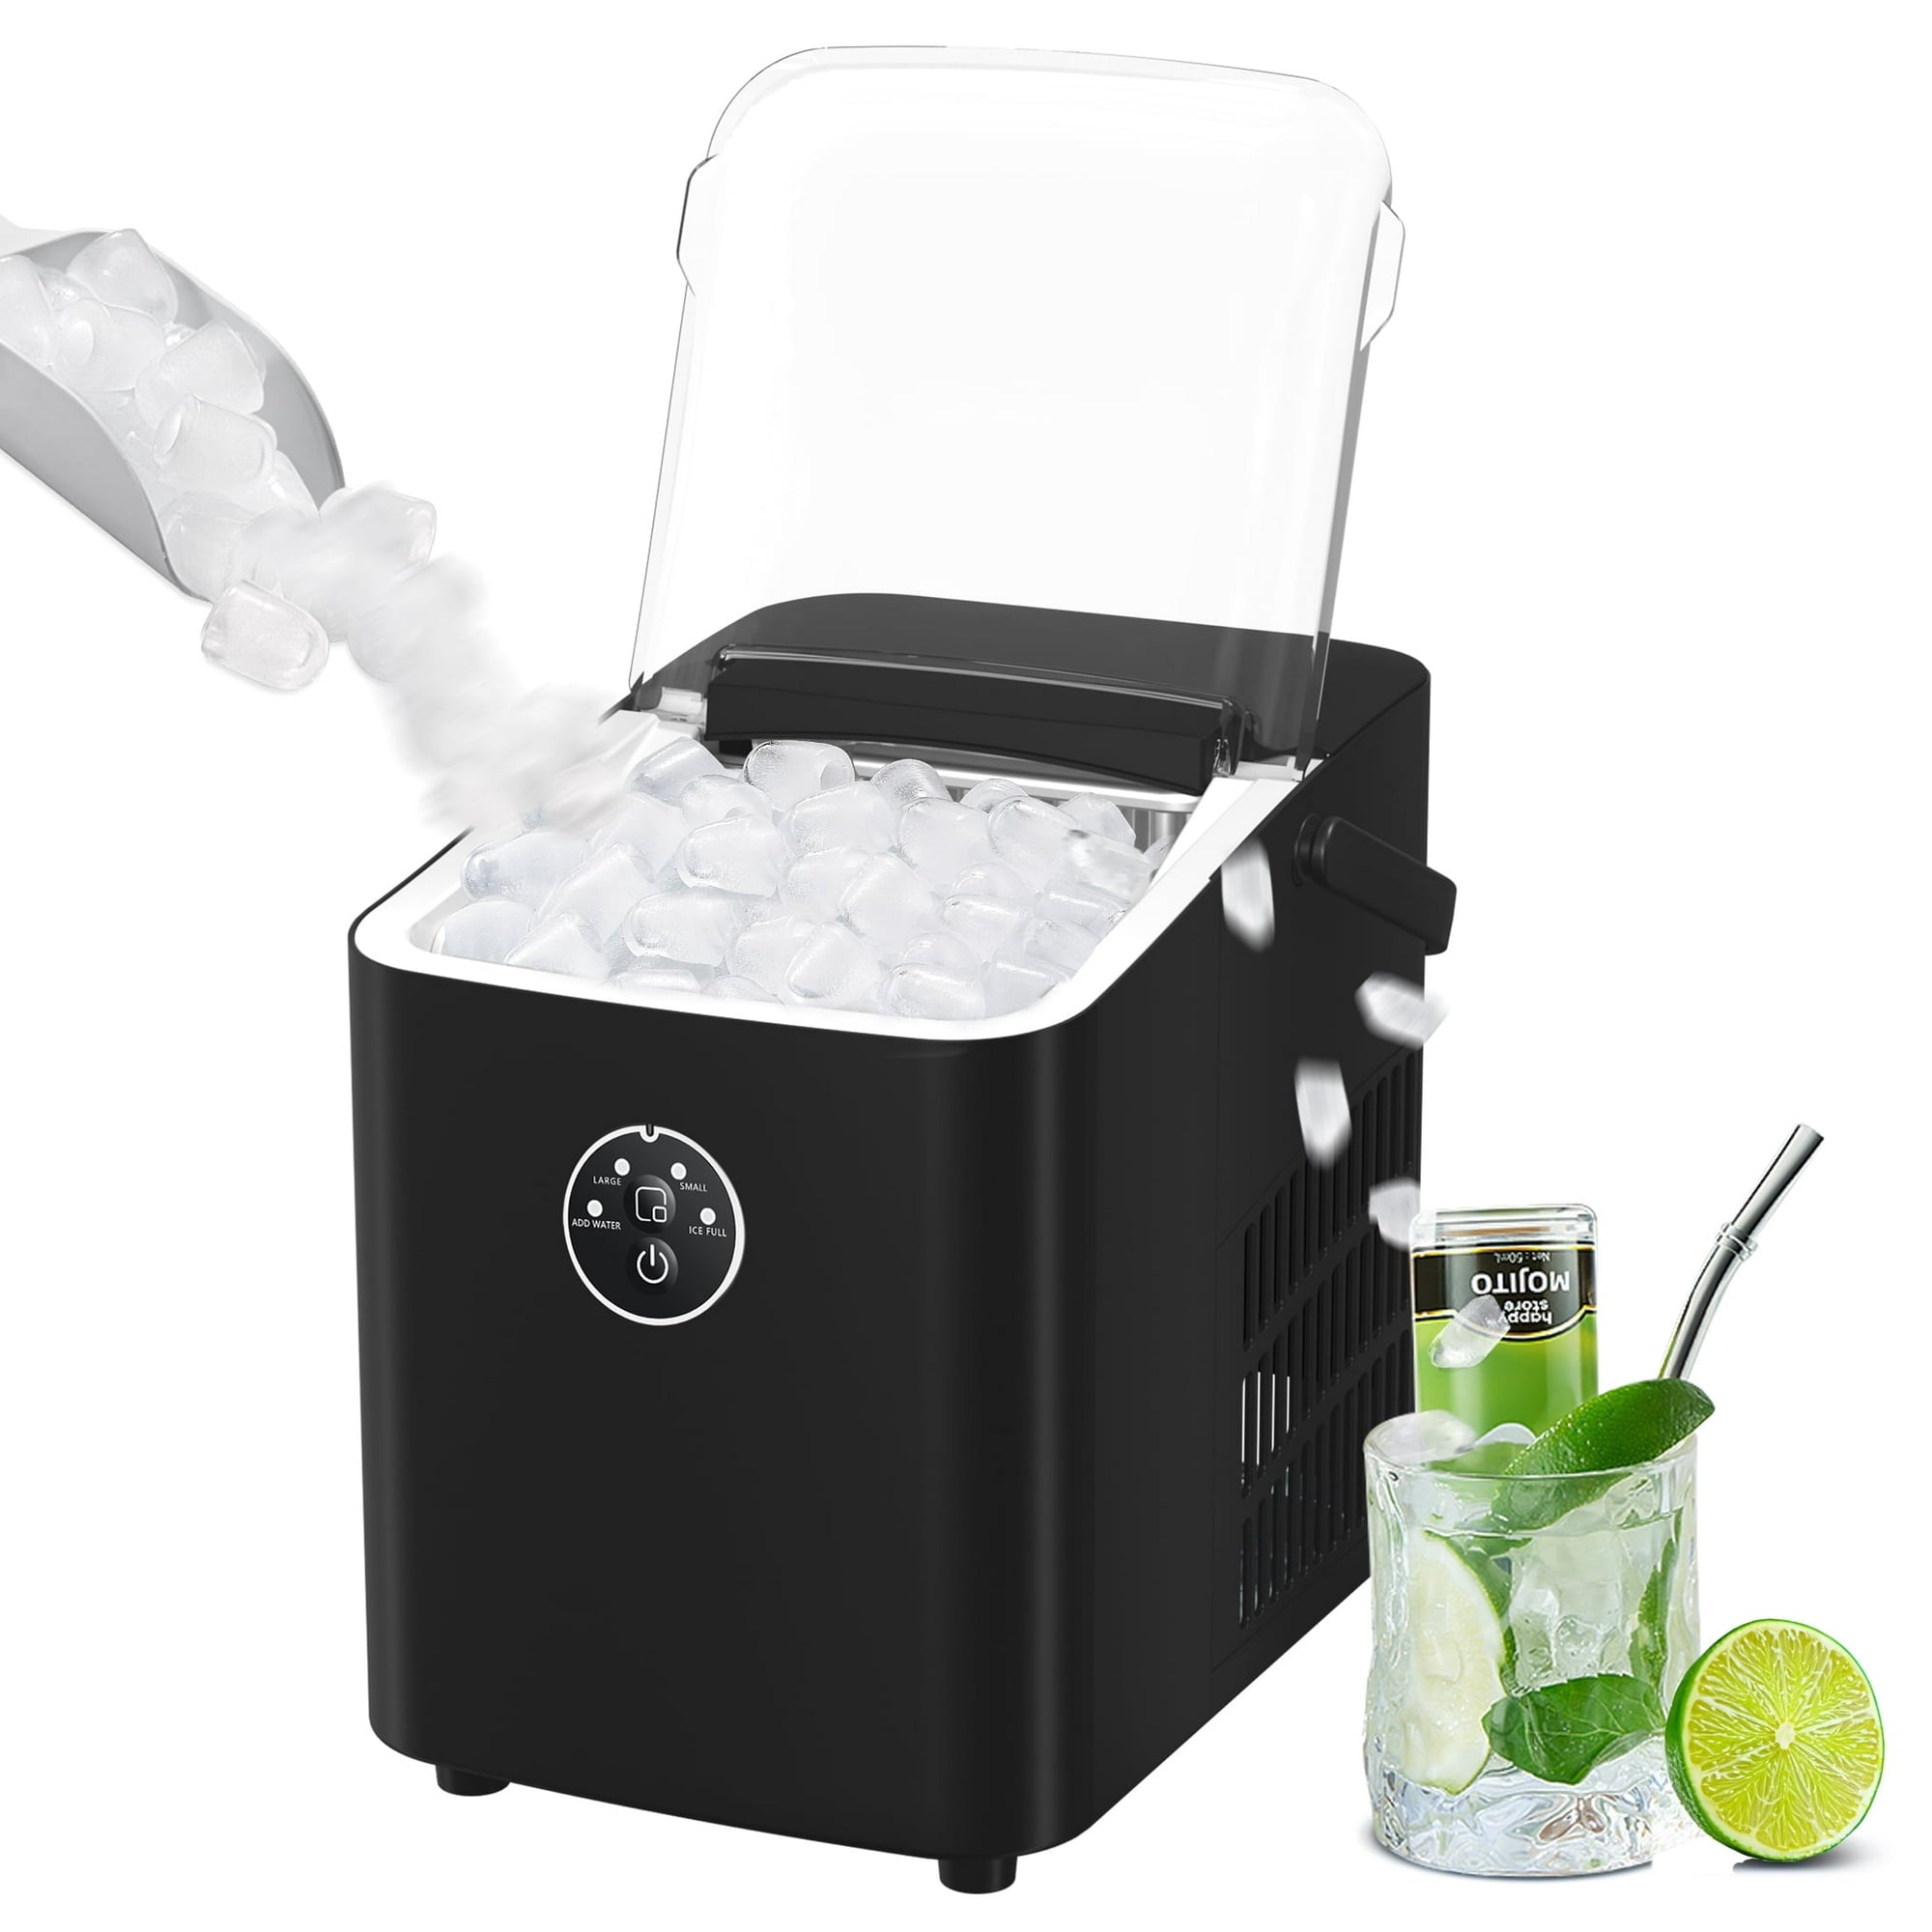 Auseo Portable Ice Maker Machine, Ice Maker Countertop with Handle, 26lbs/24H, Bullet Ice Cubes, 8 PCS Ready in 9 Mins, Self-Cleaning, Ice Scoop, Basket for Home/Kitchen/Office/Party-Black